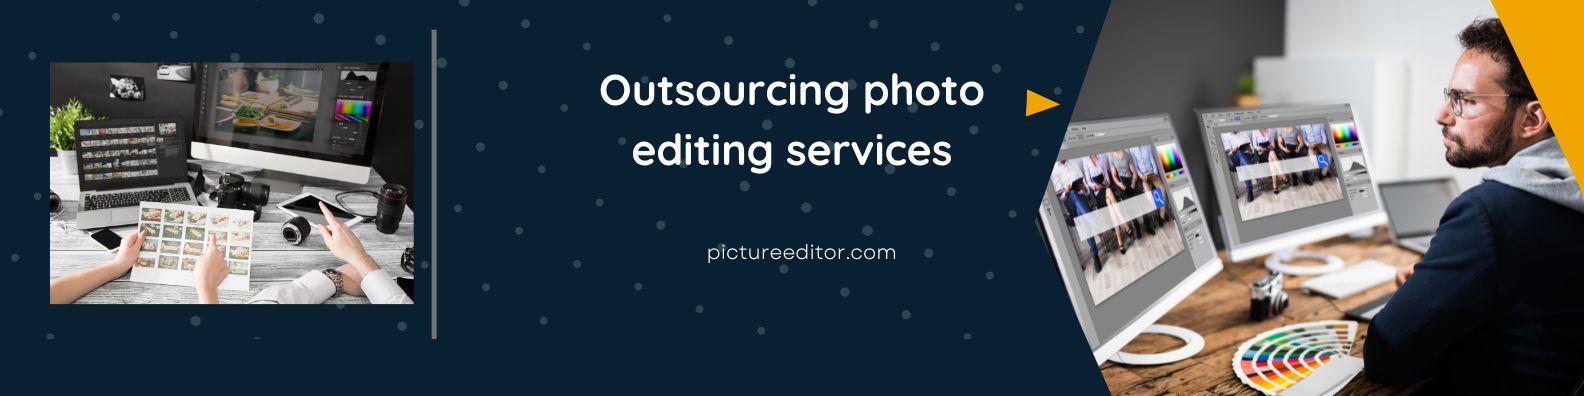 Outsourcing photo editing services